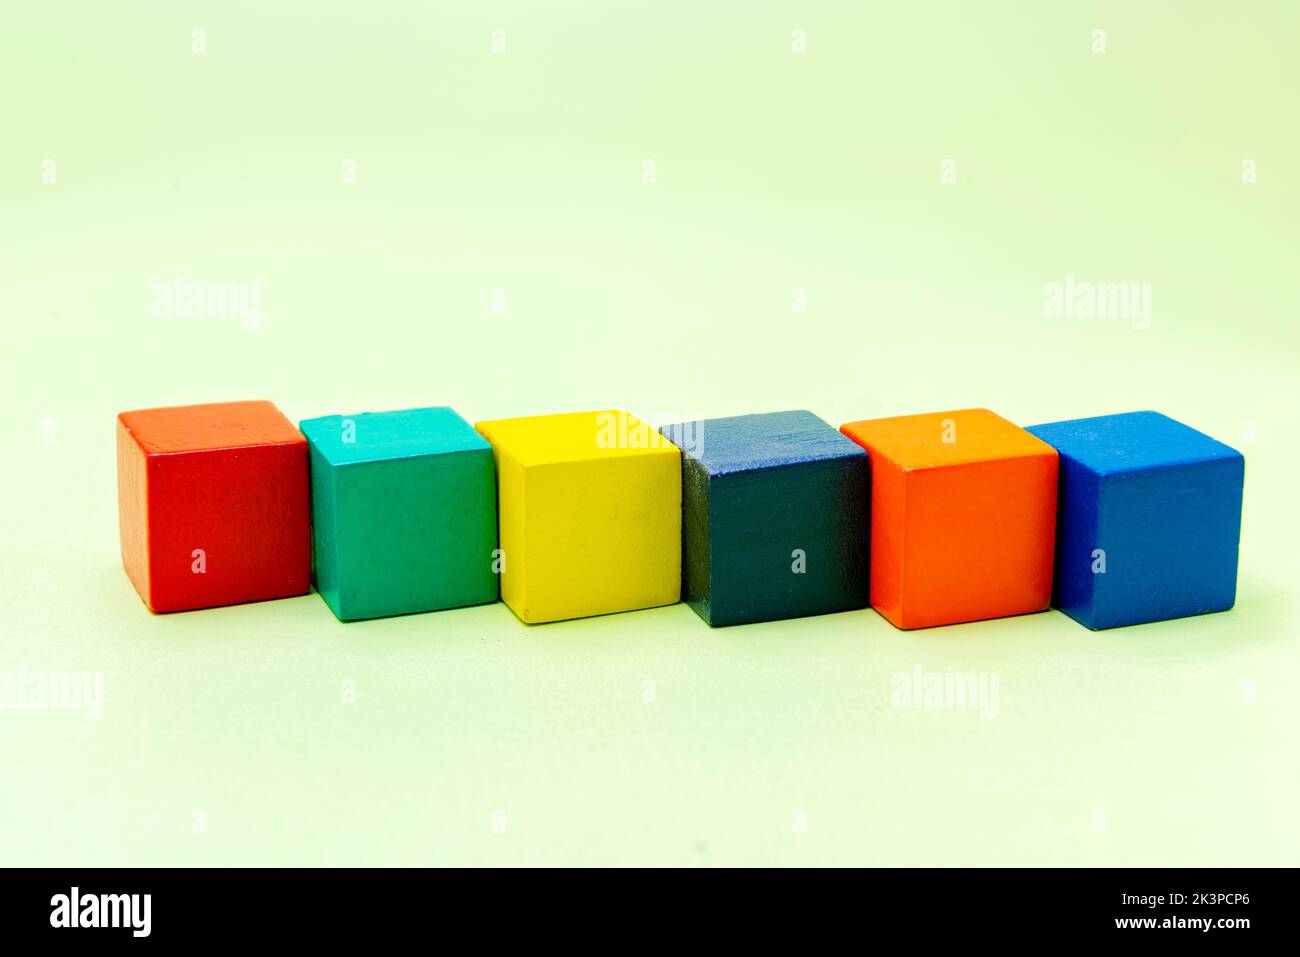 Colorful wooden block toys on a colored background Stock Photo